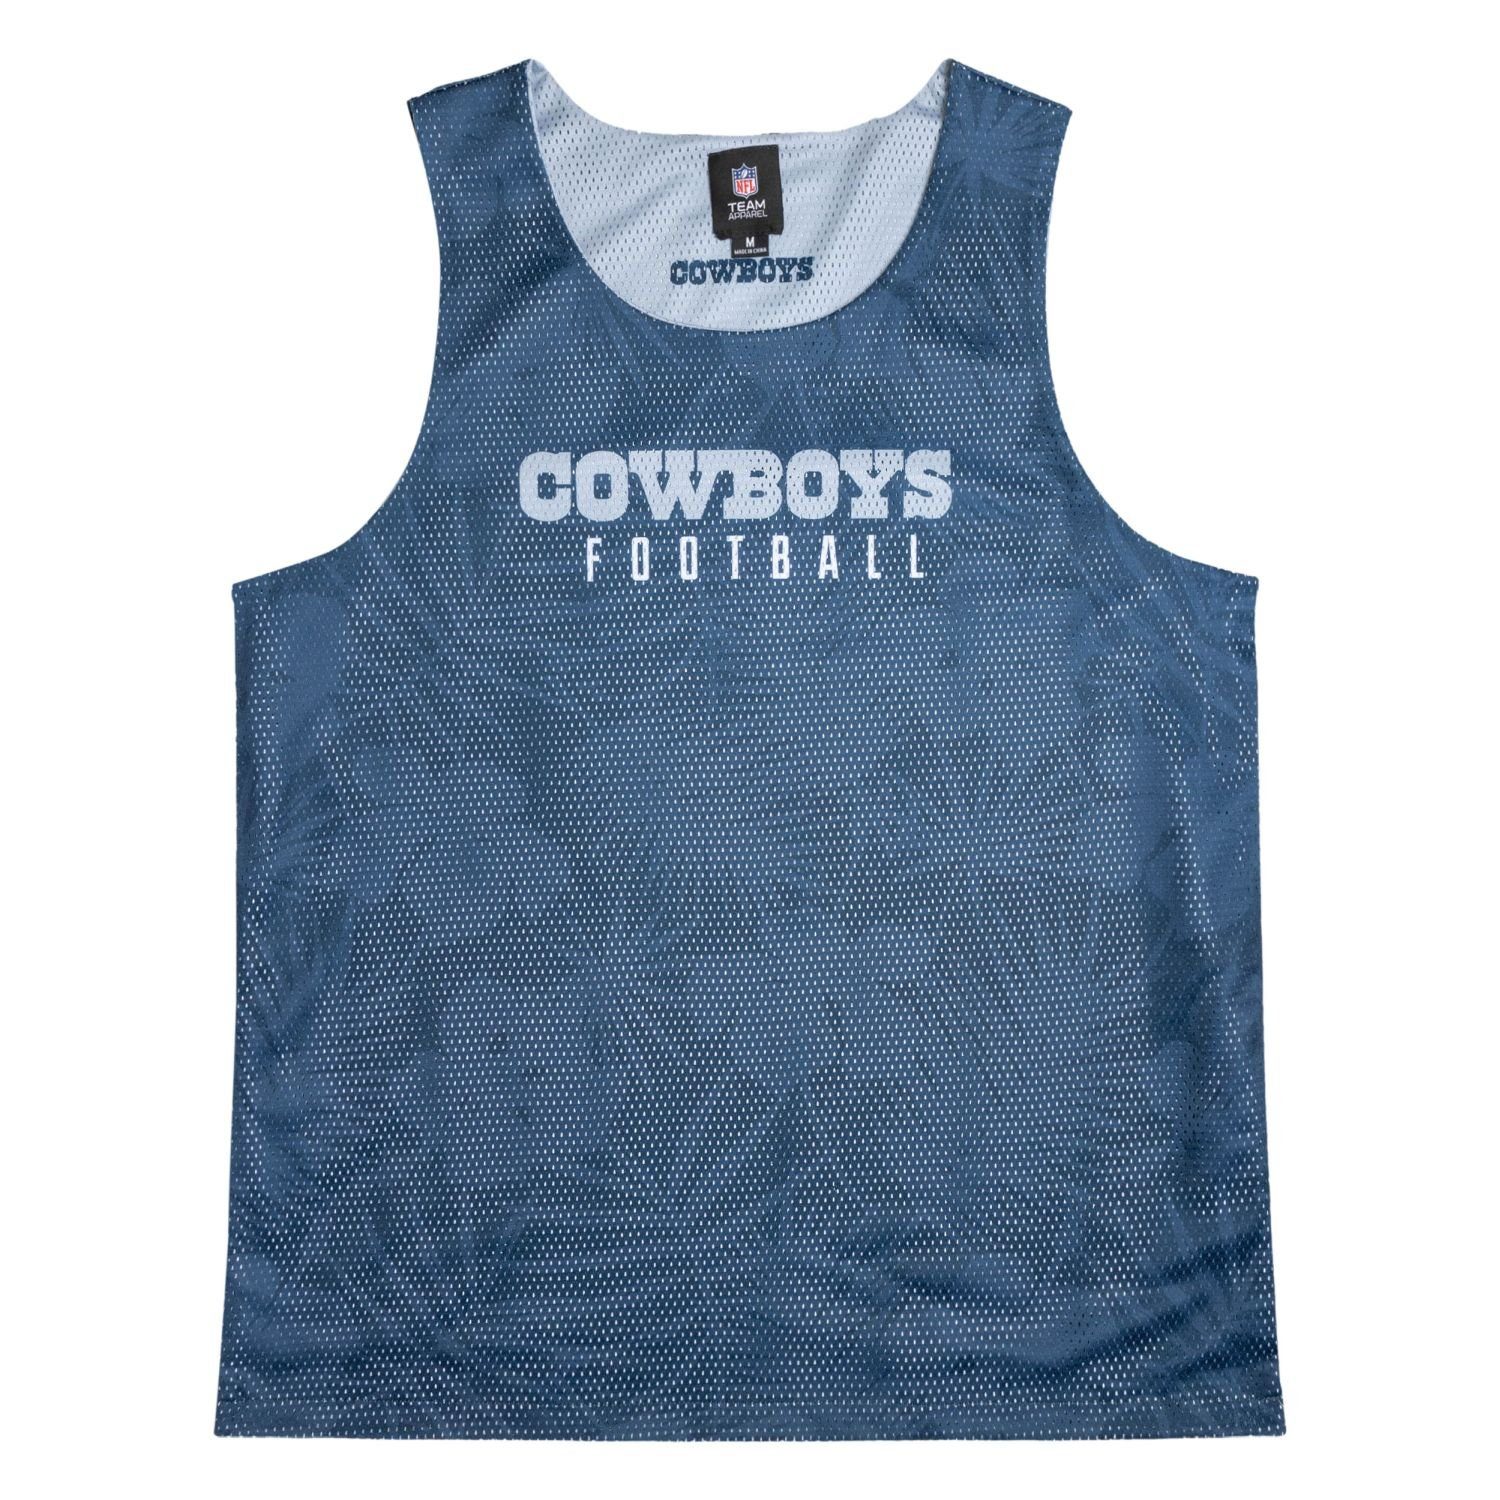 Dallas NFL Floral Muskelshirt Reversible Collectibles Cowboys Forever